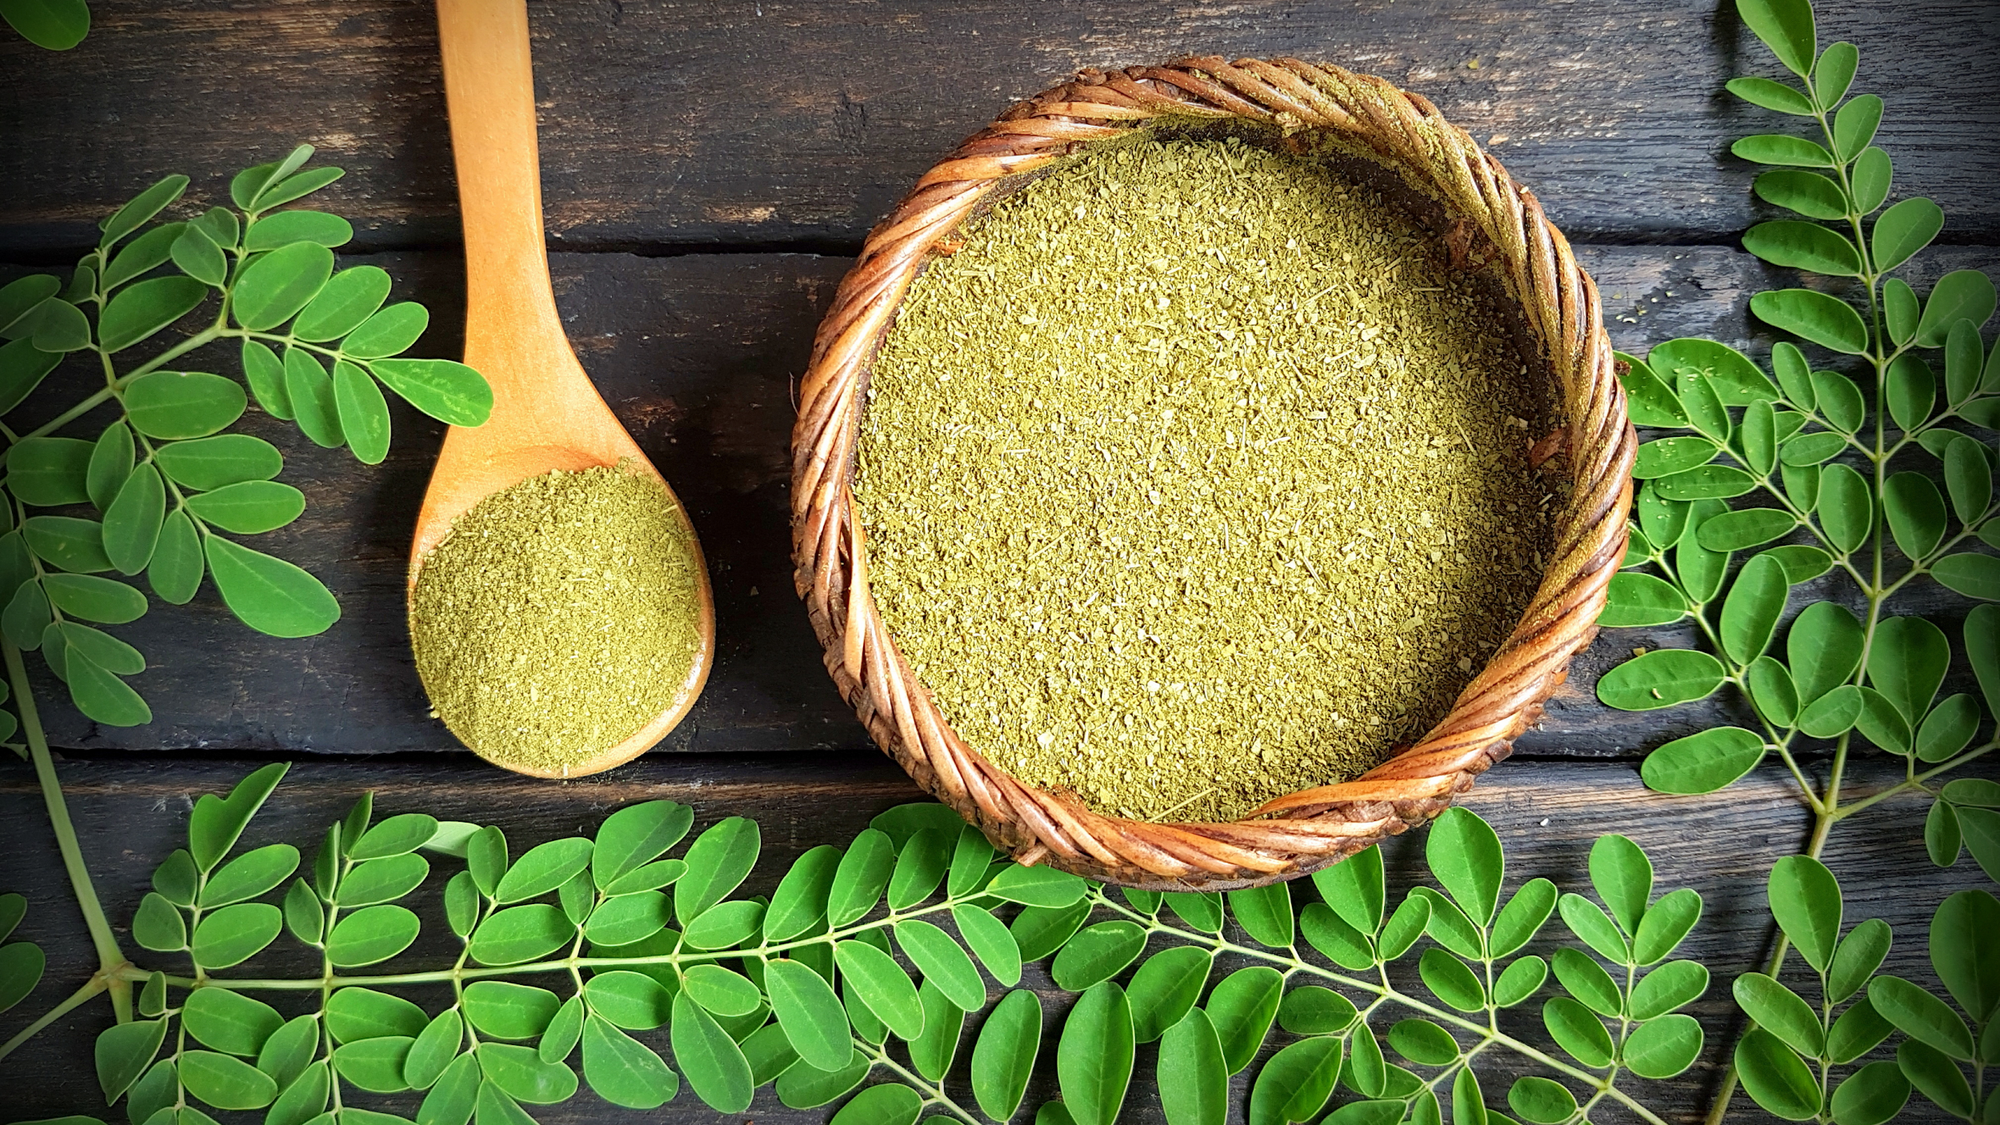 The Natural Way To Power: 12 Herbs For Energy Boost